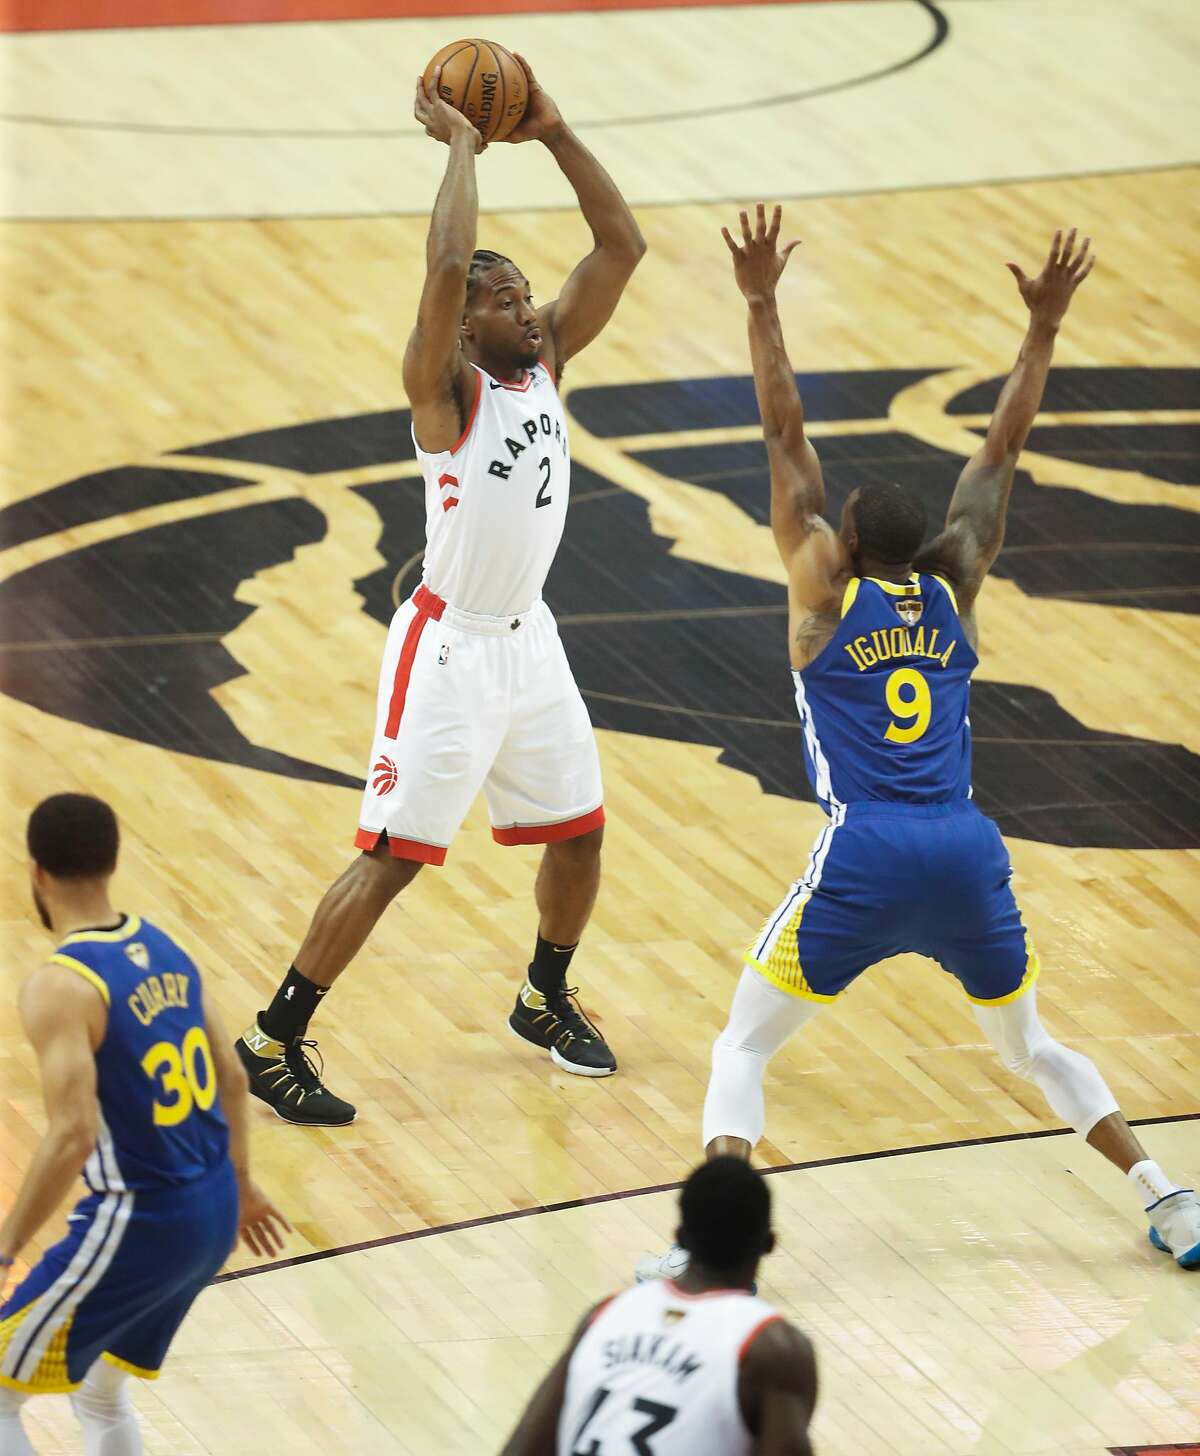 Golden State Warriors’ Andre Iguodala guards Toronto Raptors’ Kawhi Leonard in the first quarter during game 1 of the NBA Finals between the Golden State Warriors and the Toronto Raptors at Scotiabank Arena on Thursday, May 30, 2019 in Toronto, Ontario, Canada.